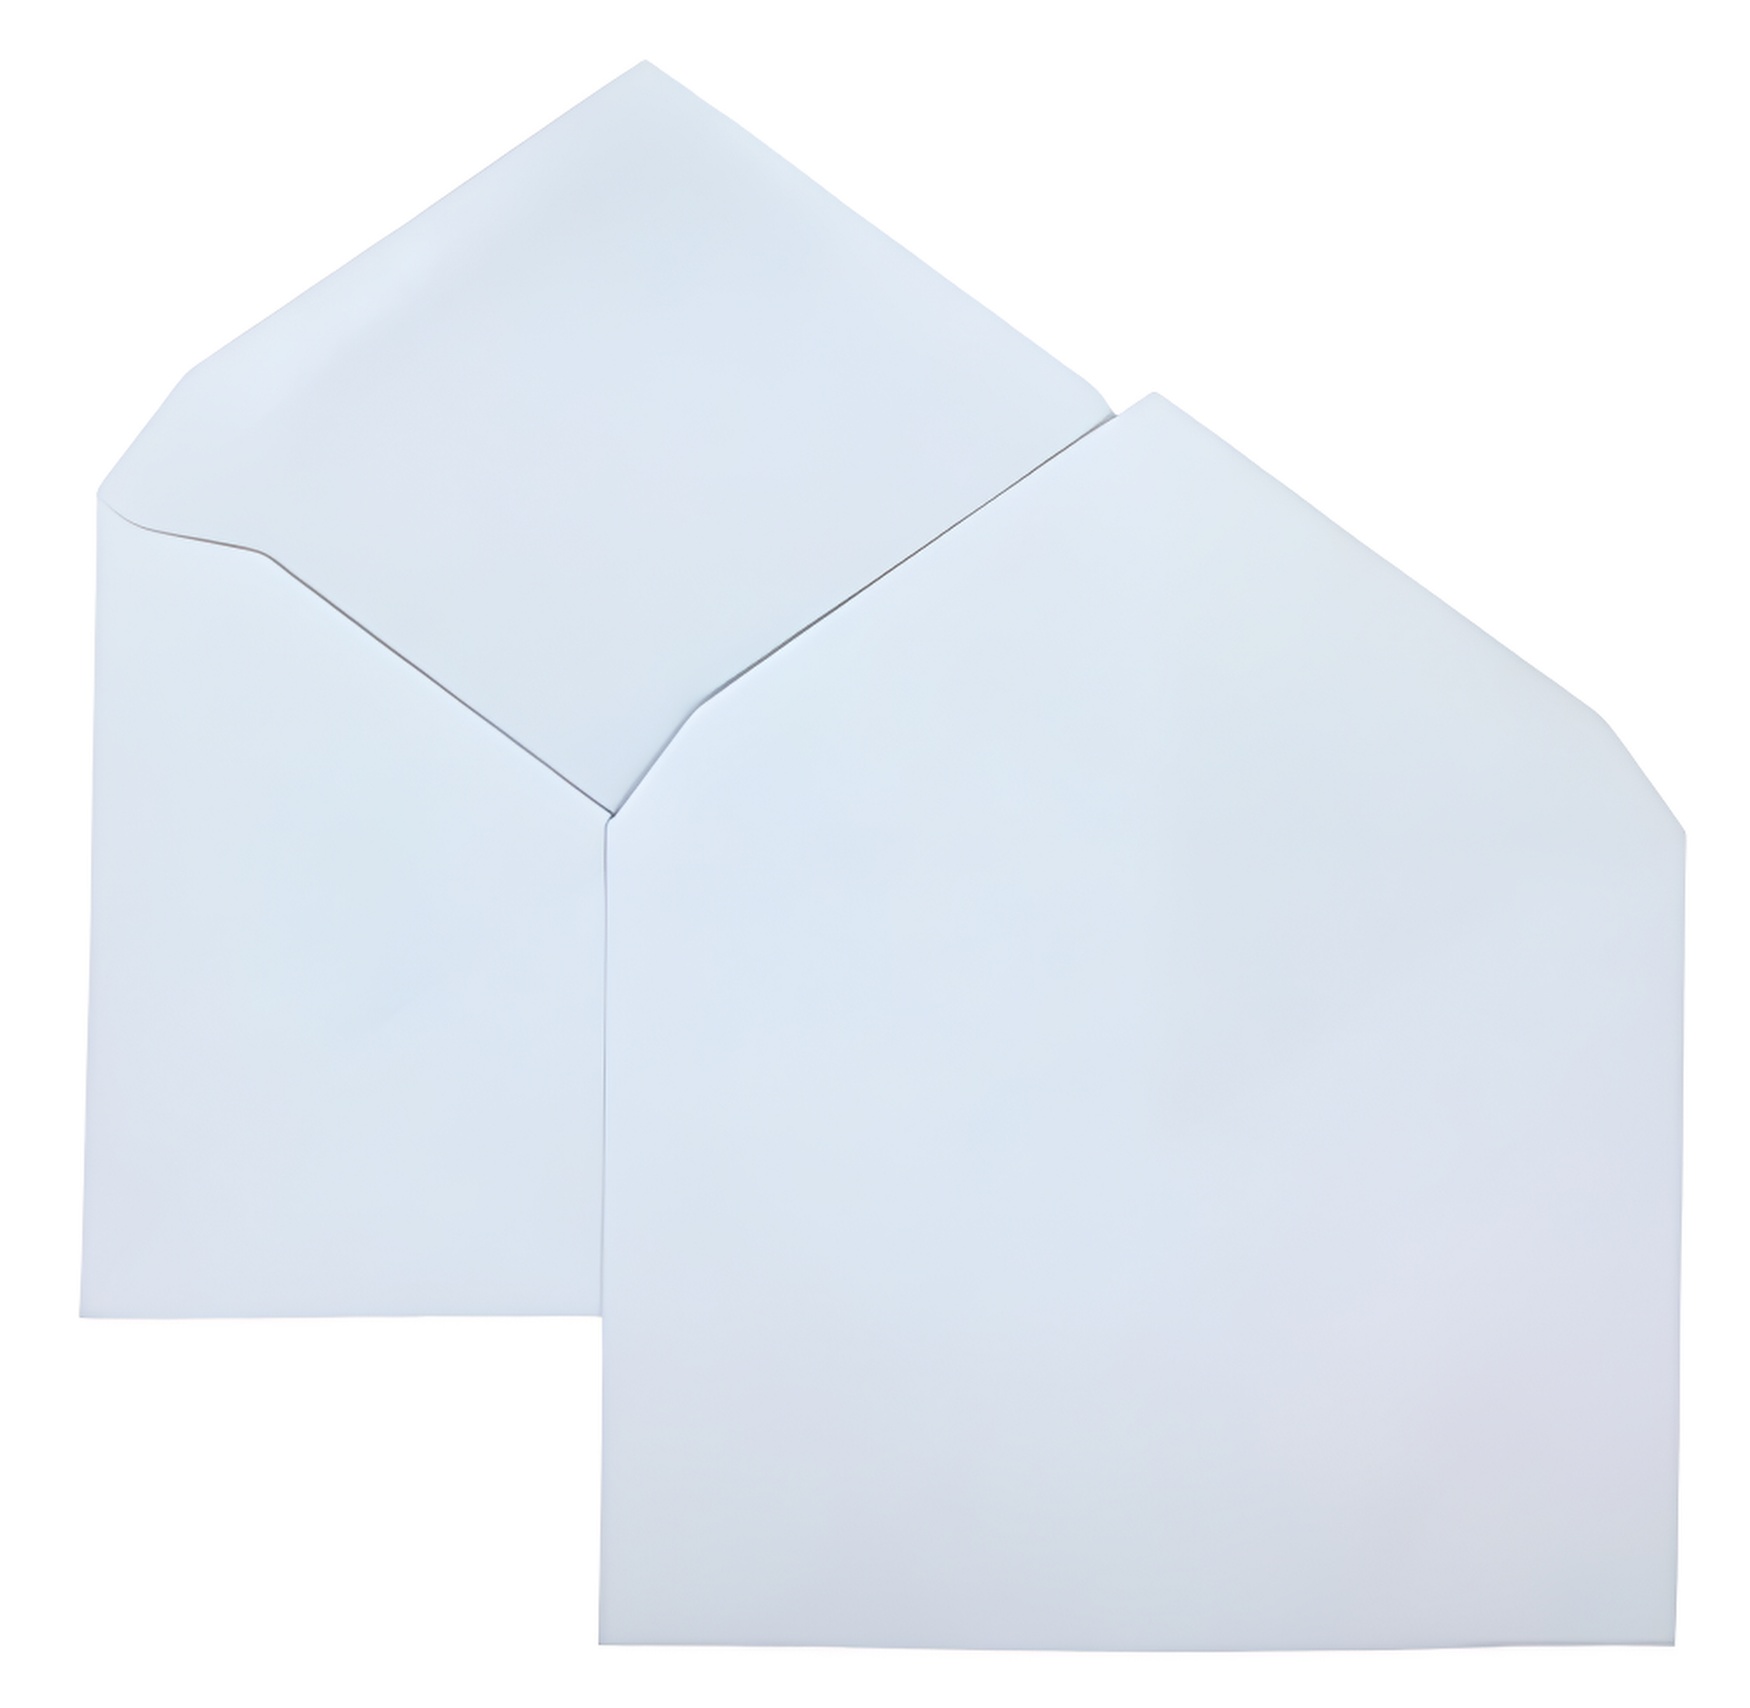 Image of ID 1214262207 5000 ShippingMailers 4 3/8 x 5 3/4 White Paper A2 Invitation Envelopes /w Gummed Closure